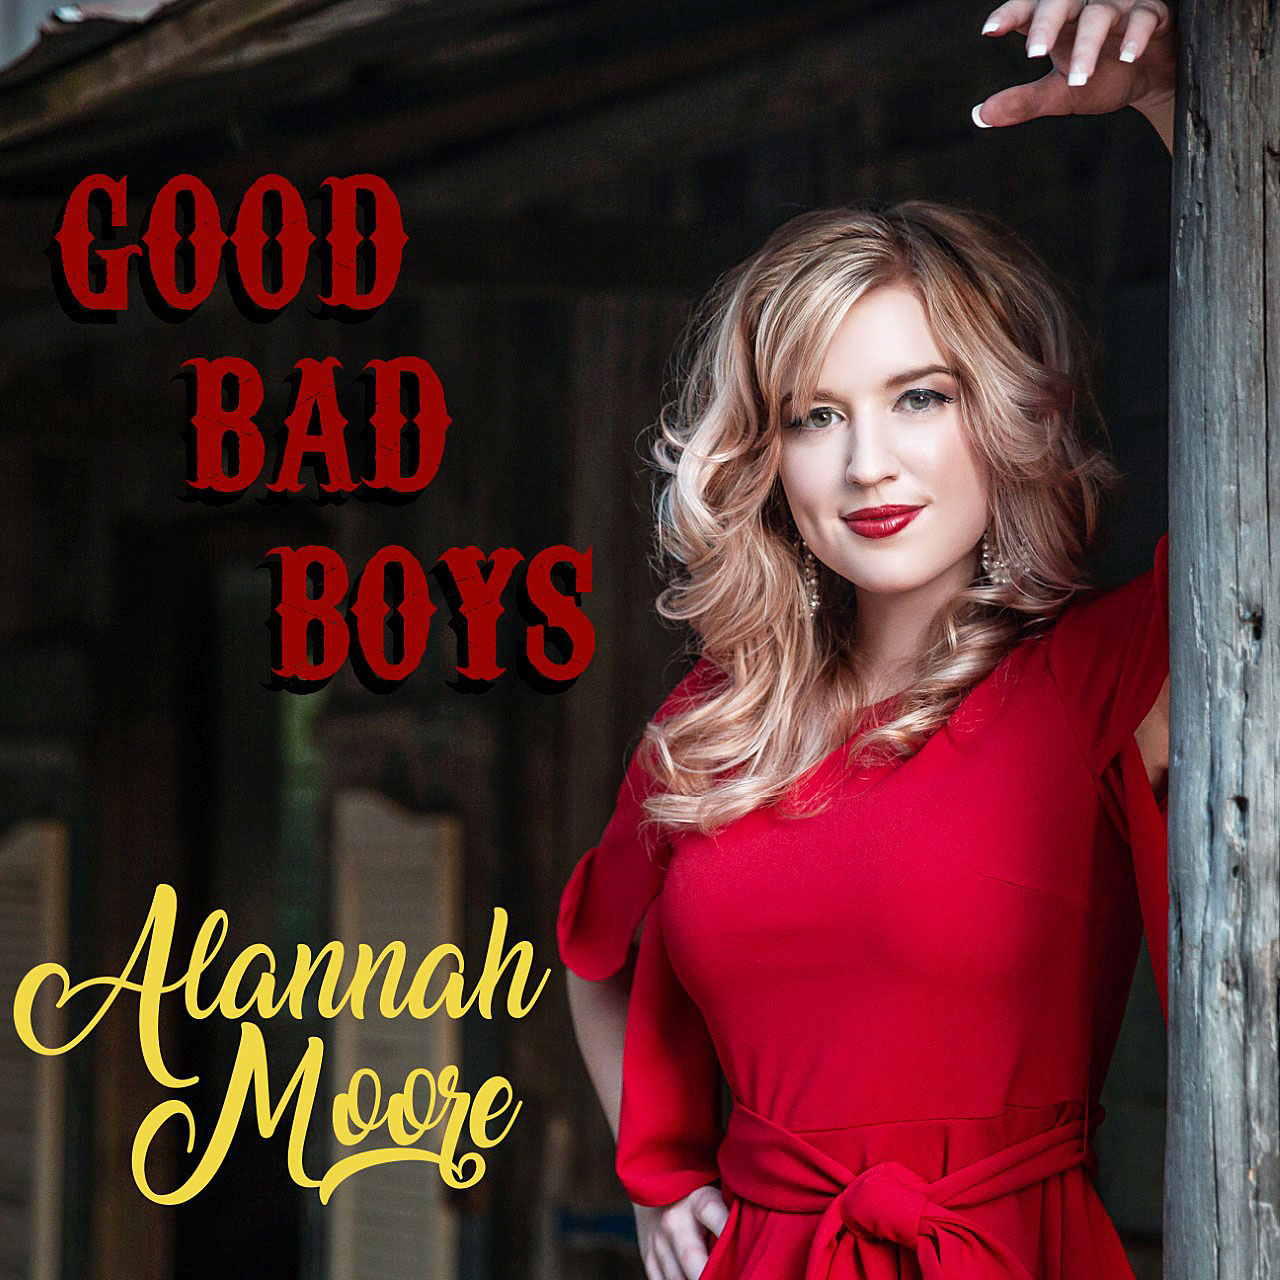 Good Bad Boys by Alannah Moore Us Weekly Buzzzz-o-Meter Issue 19